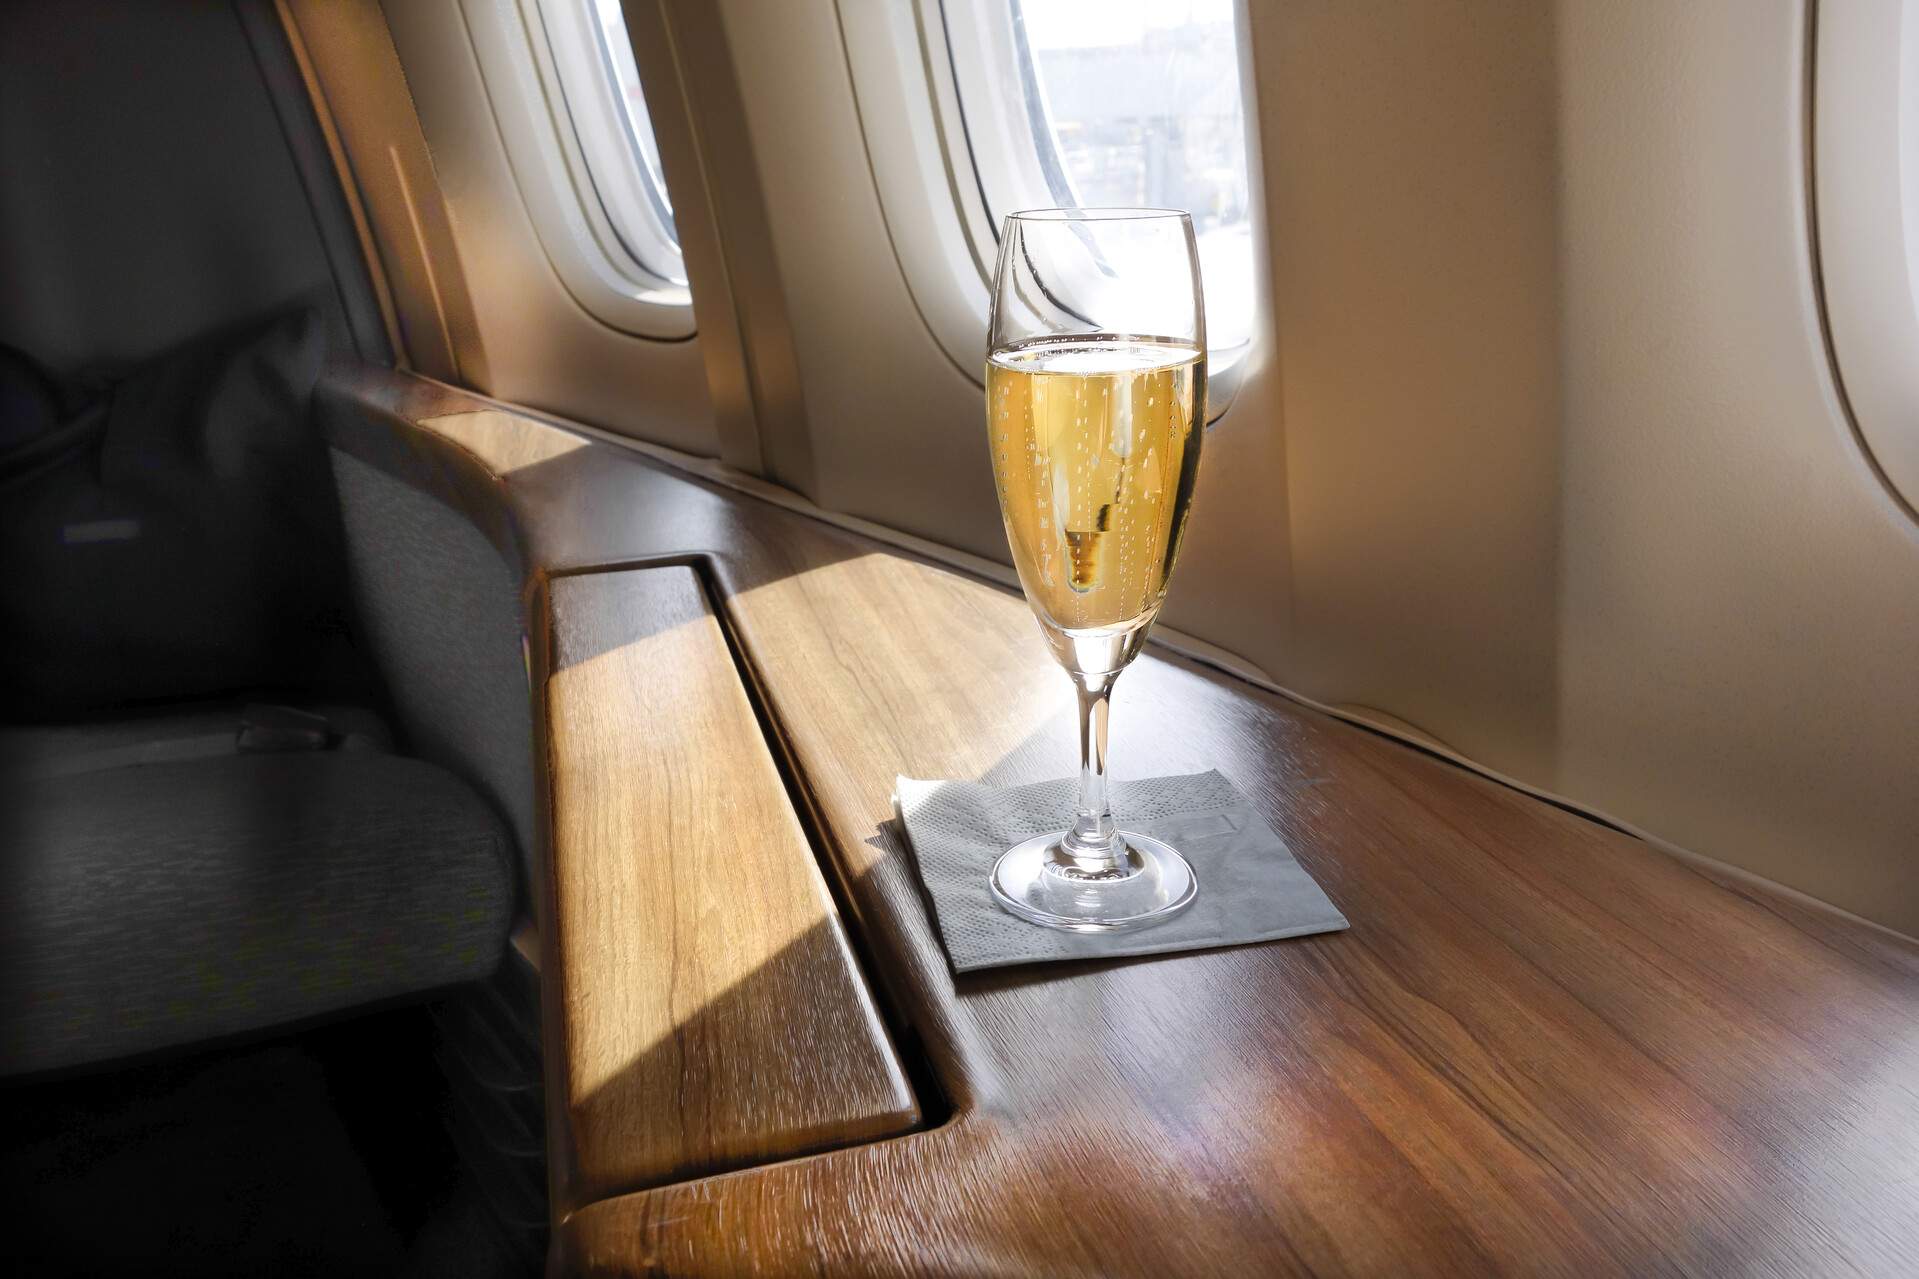 A glass of exquisite champagne awaits a privileged first-class passenger, ready to be savoured during their luxurious airline journey.